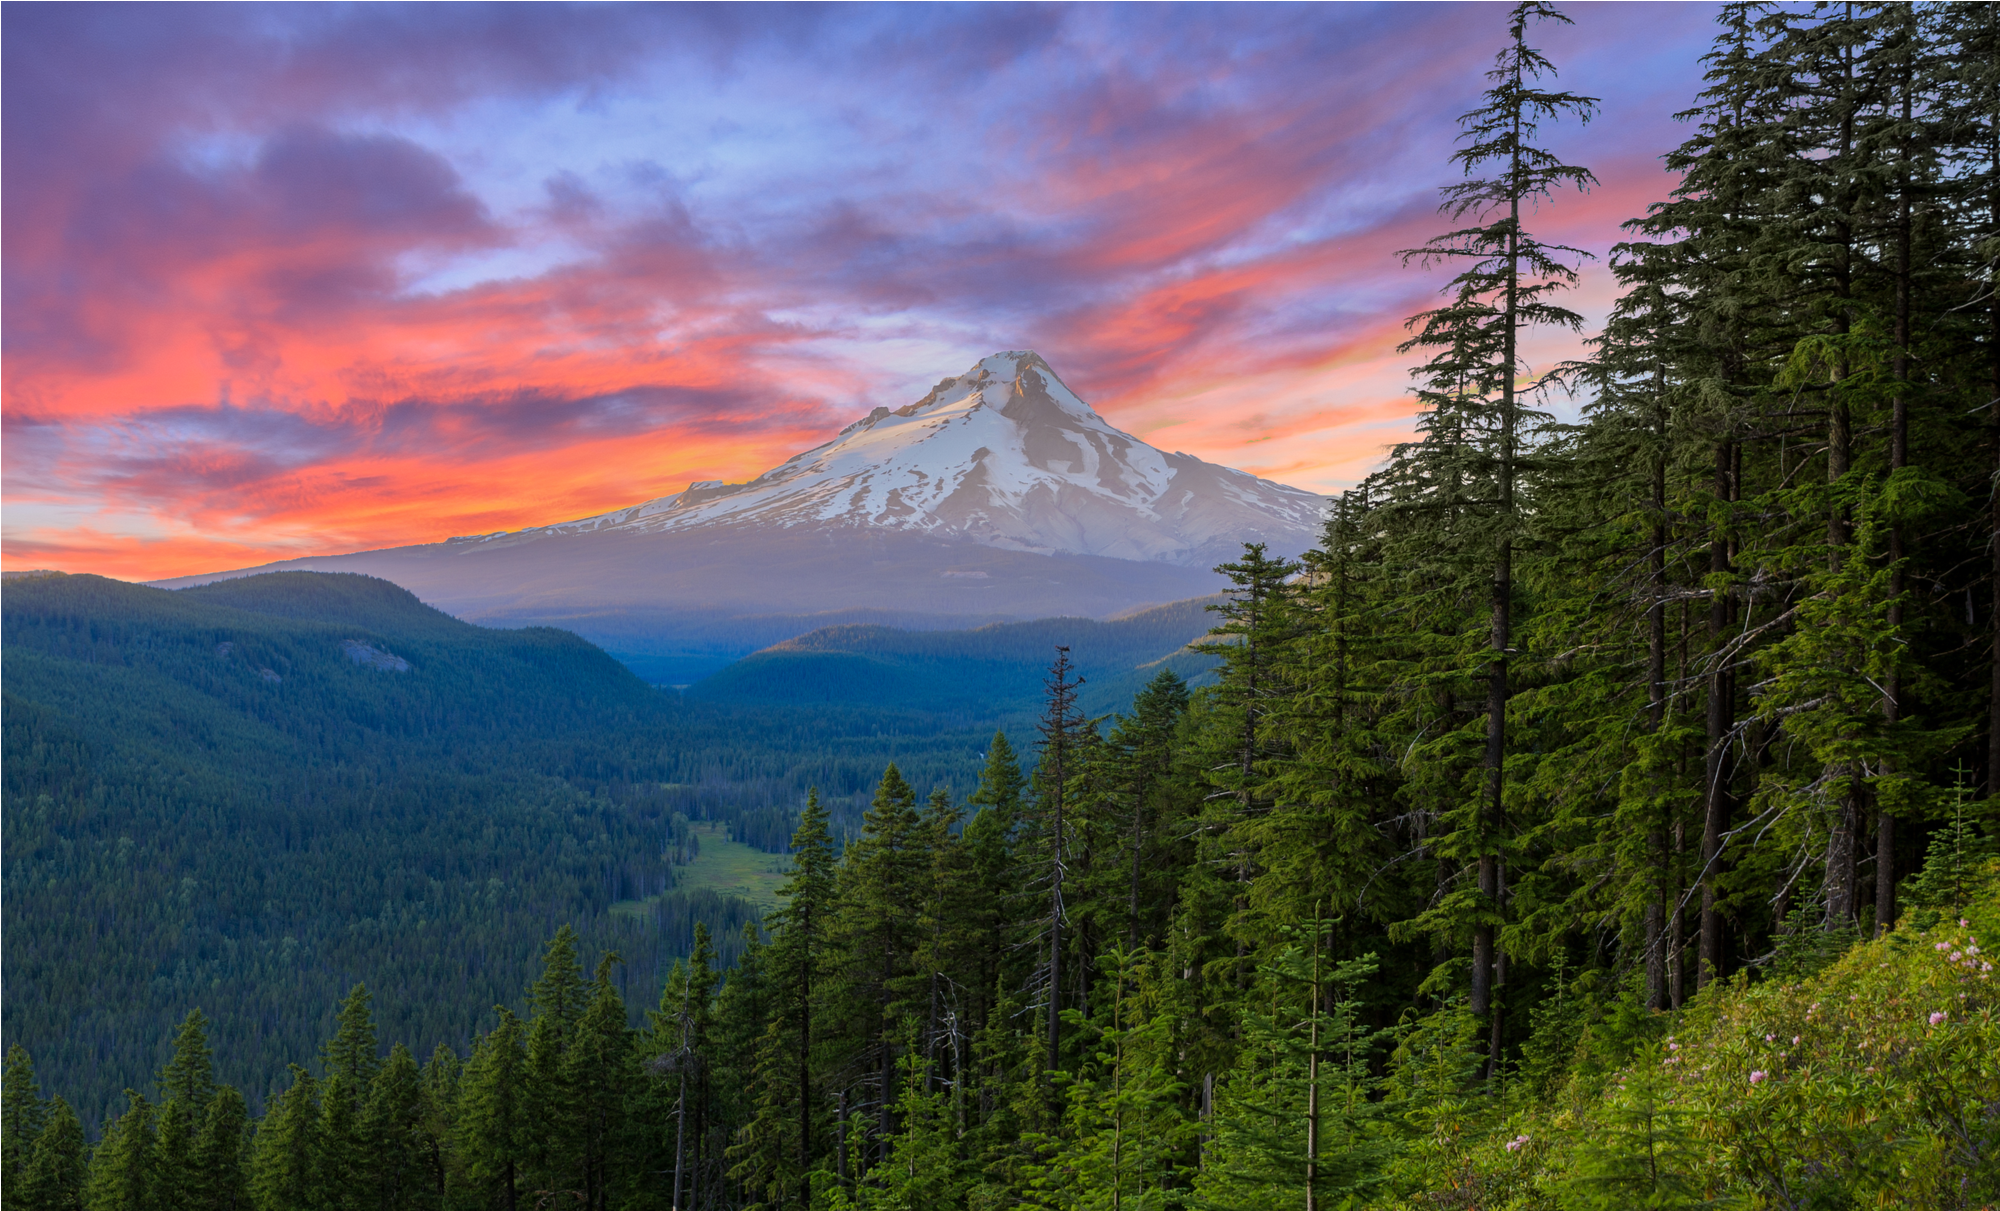 Mount Rainier with trees in foreground